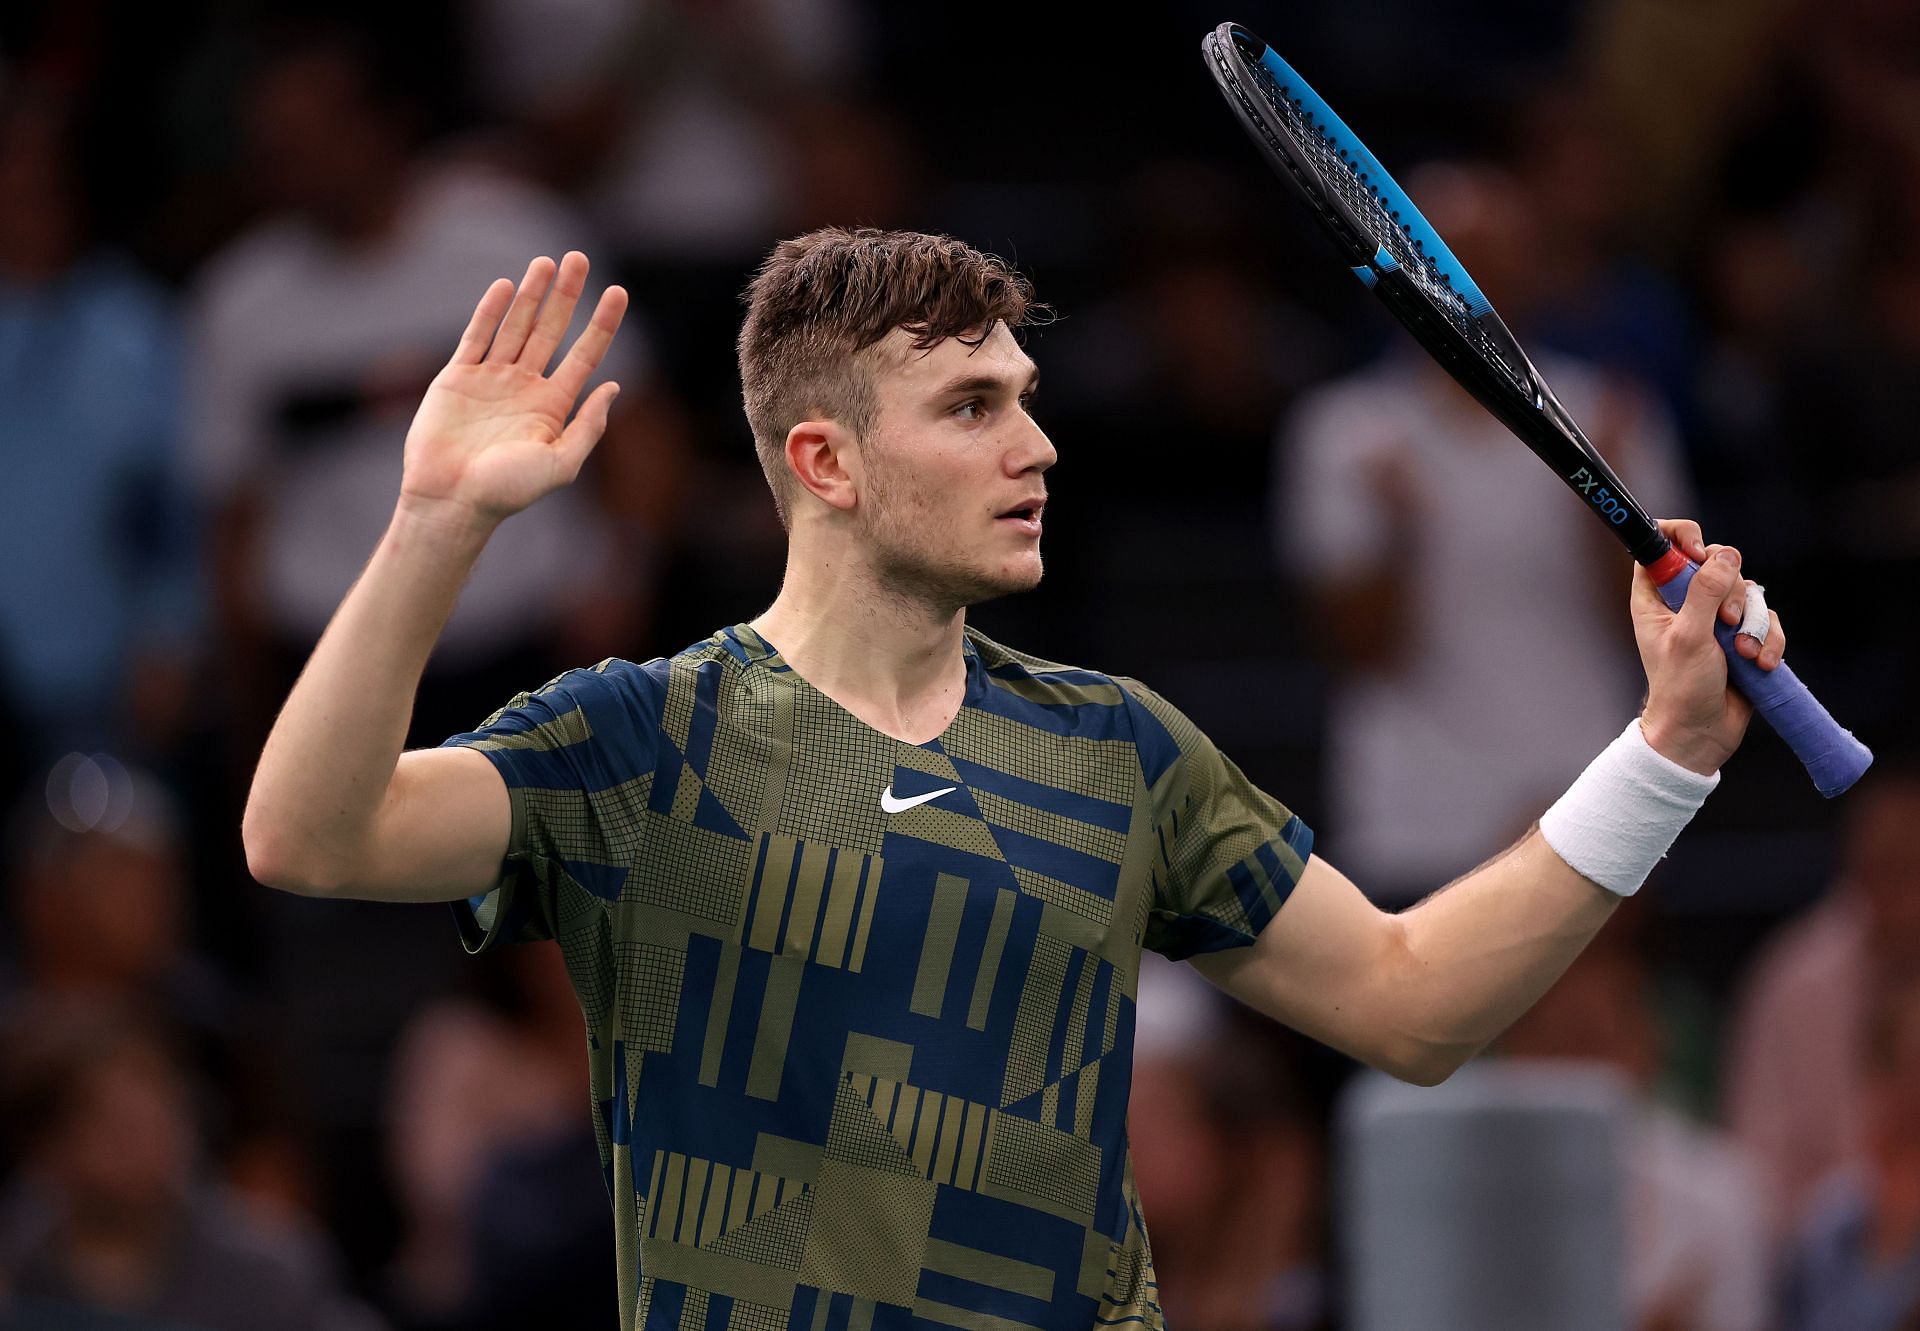 Next Gen ATP Finals 2022 Mens draw, schedule, players, prize money breakdown and more